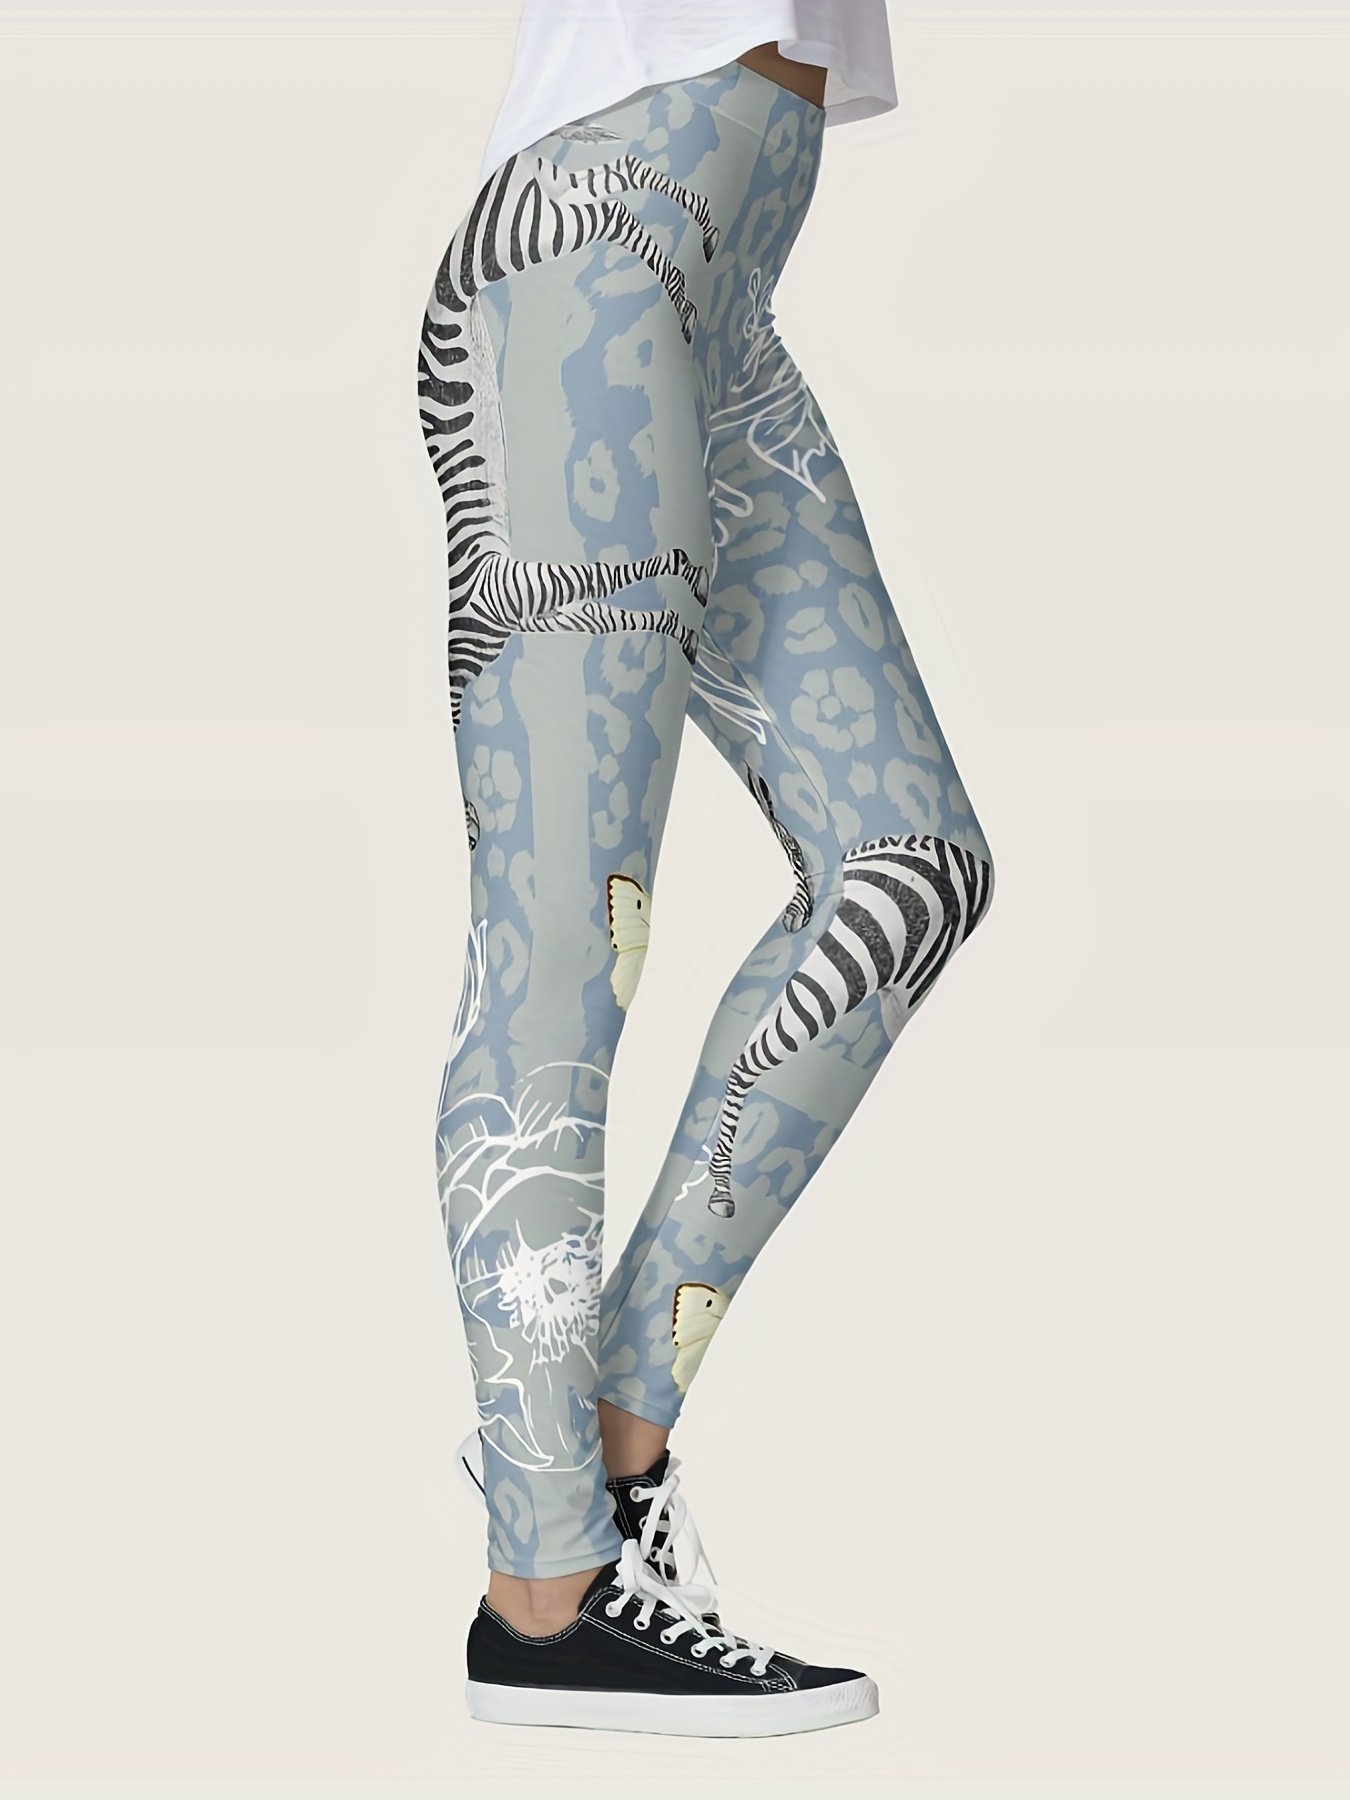 Women's Activewear: Colorful Zebra Pattern Yoga Leggings - Polyester High  Stretch Breathable Workout Pants